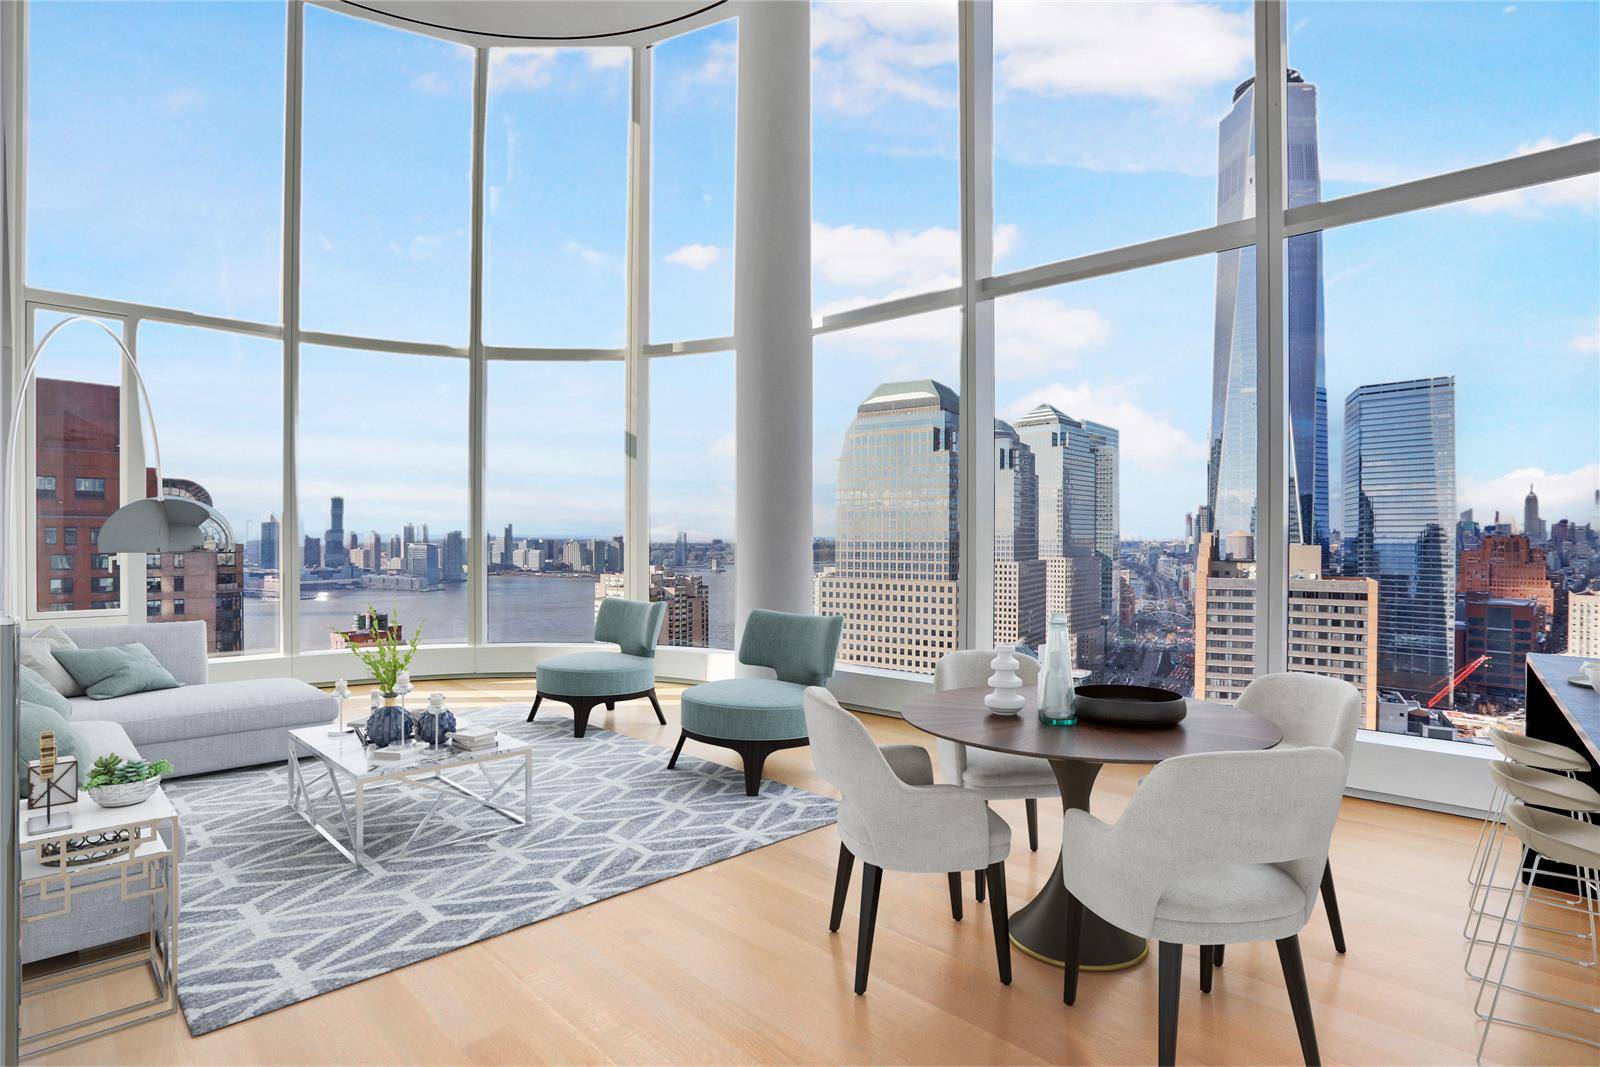 No Broker Fee!!!  Limited Time Only!!!  Exquisite Financial District 3 Bedroom Apartment with 4 Baths featuring a Rooftop Deck and Pool